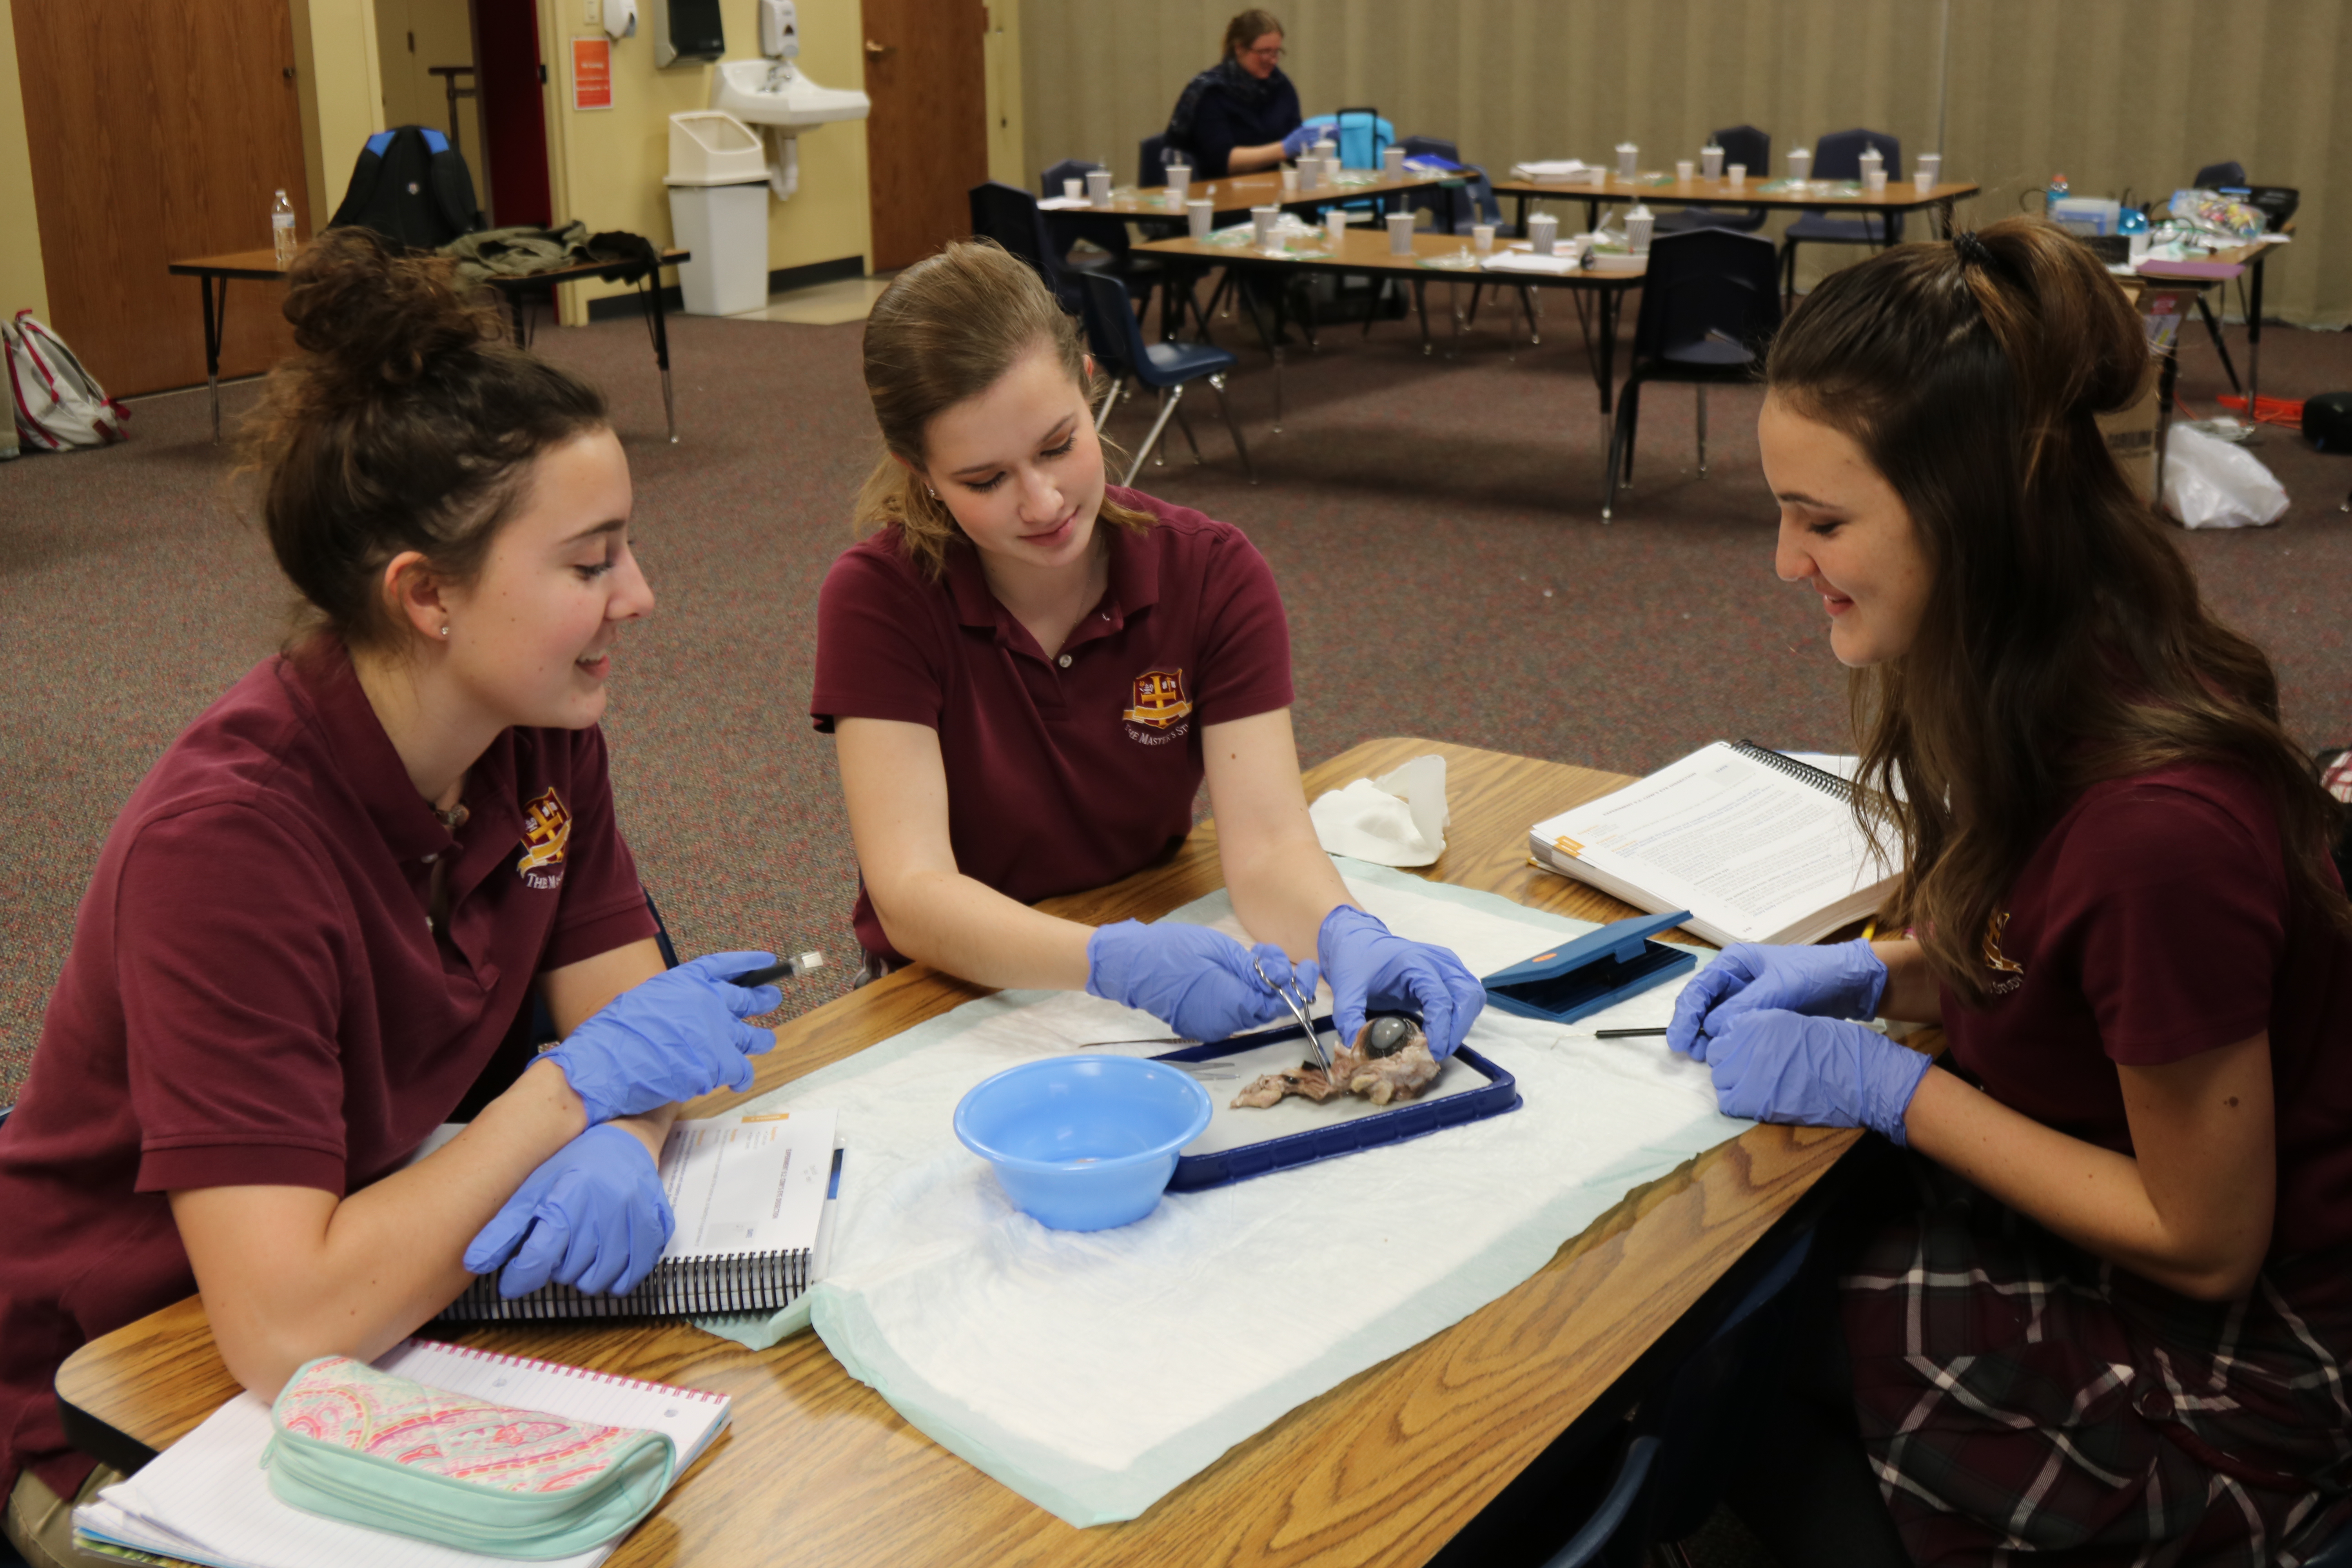 Anatomy students dissect cow eyes